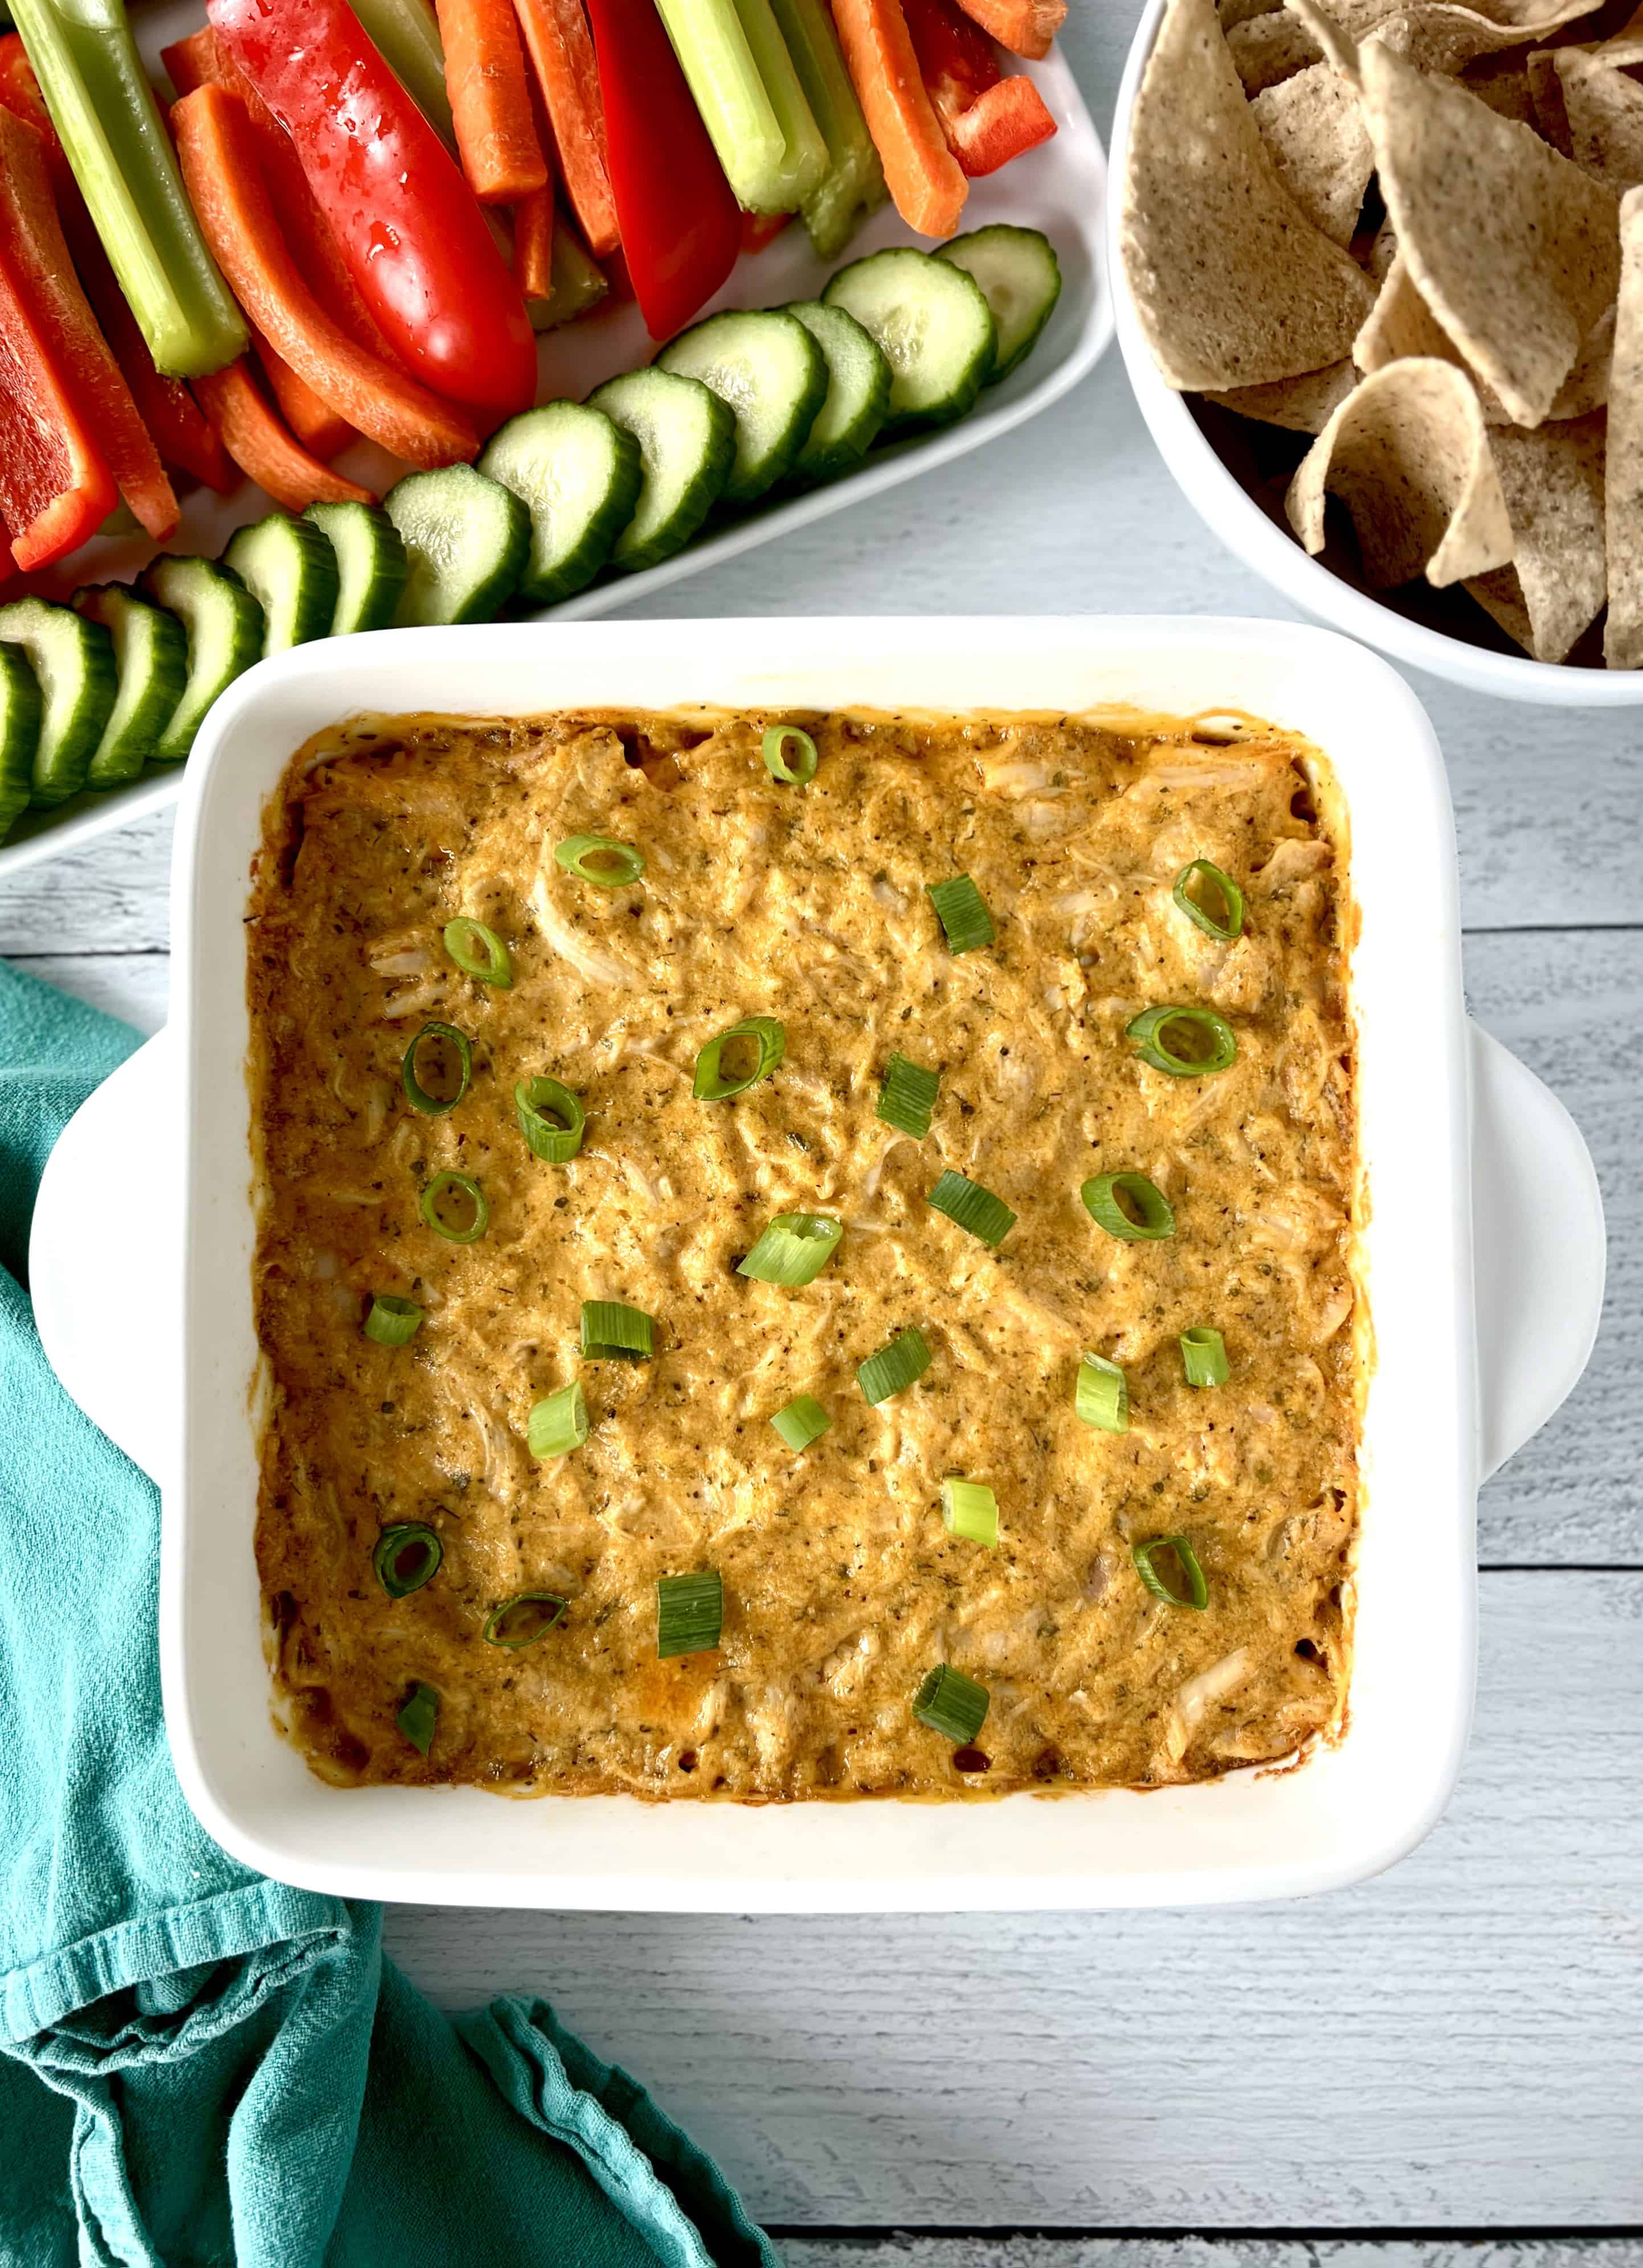 Healthy Paleo dip for veggies made with shredded chicken and hot sauce, in a white square baking dish